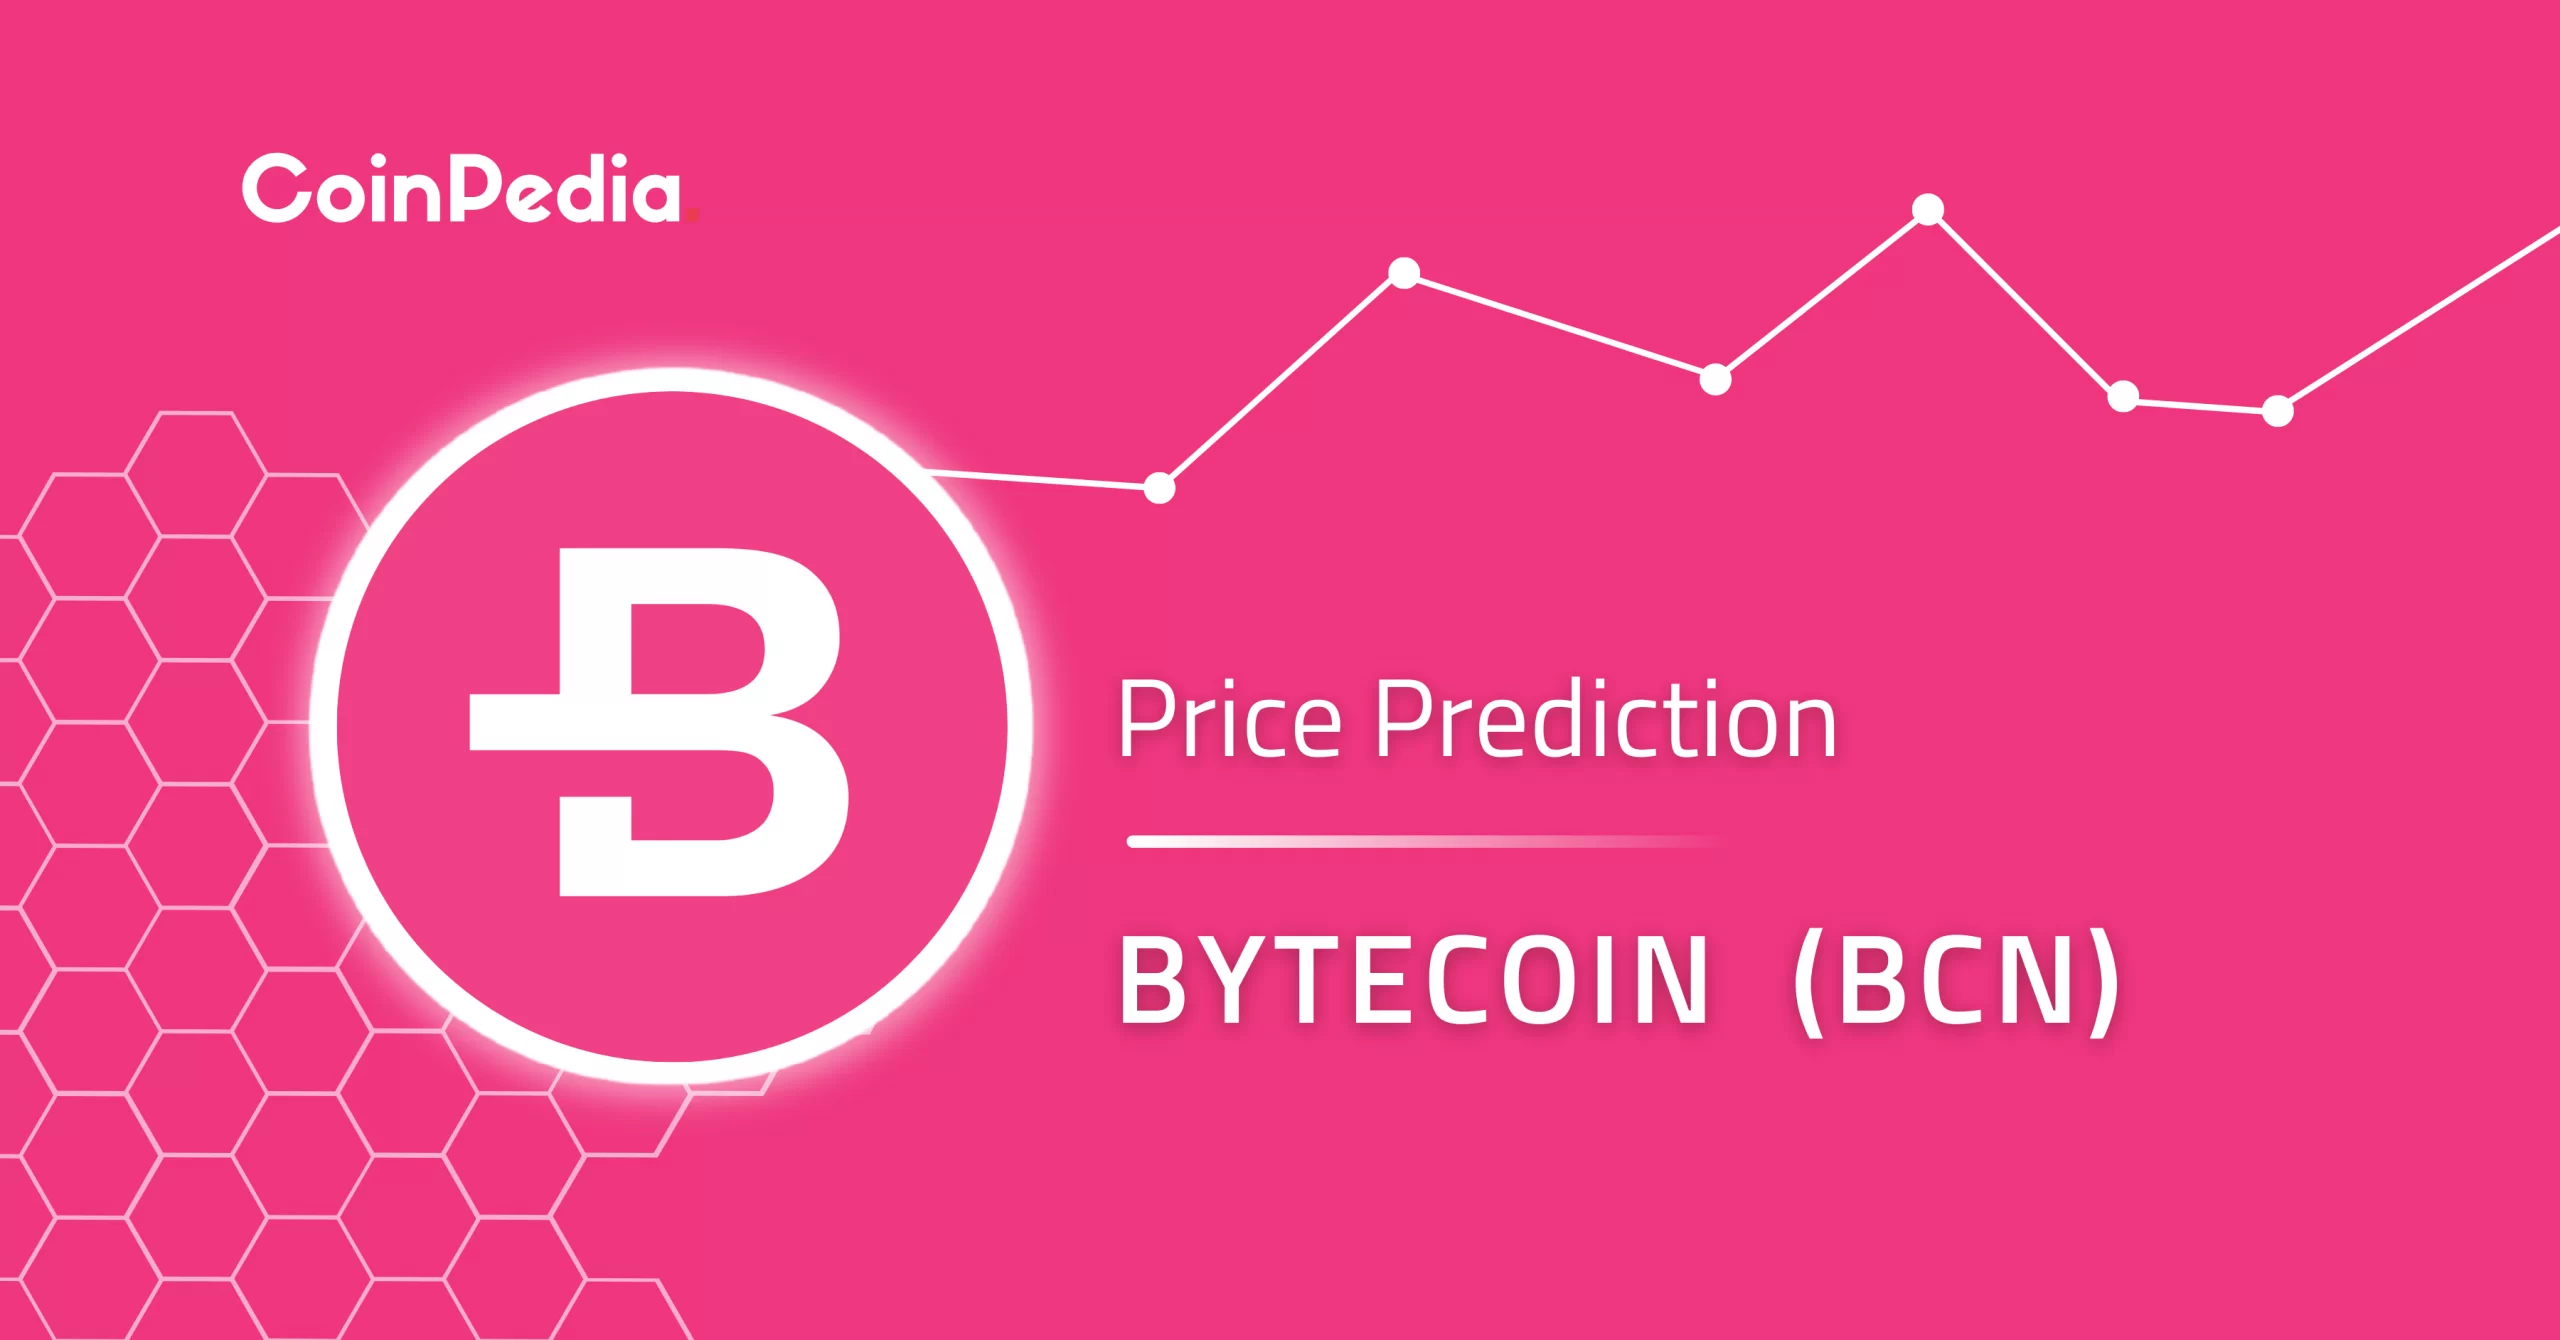 Why Bytecoin (BCN) is a great investment - Coinnounce